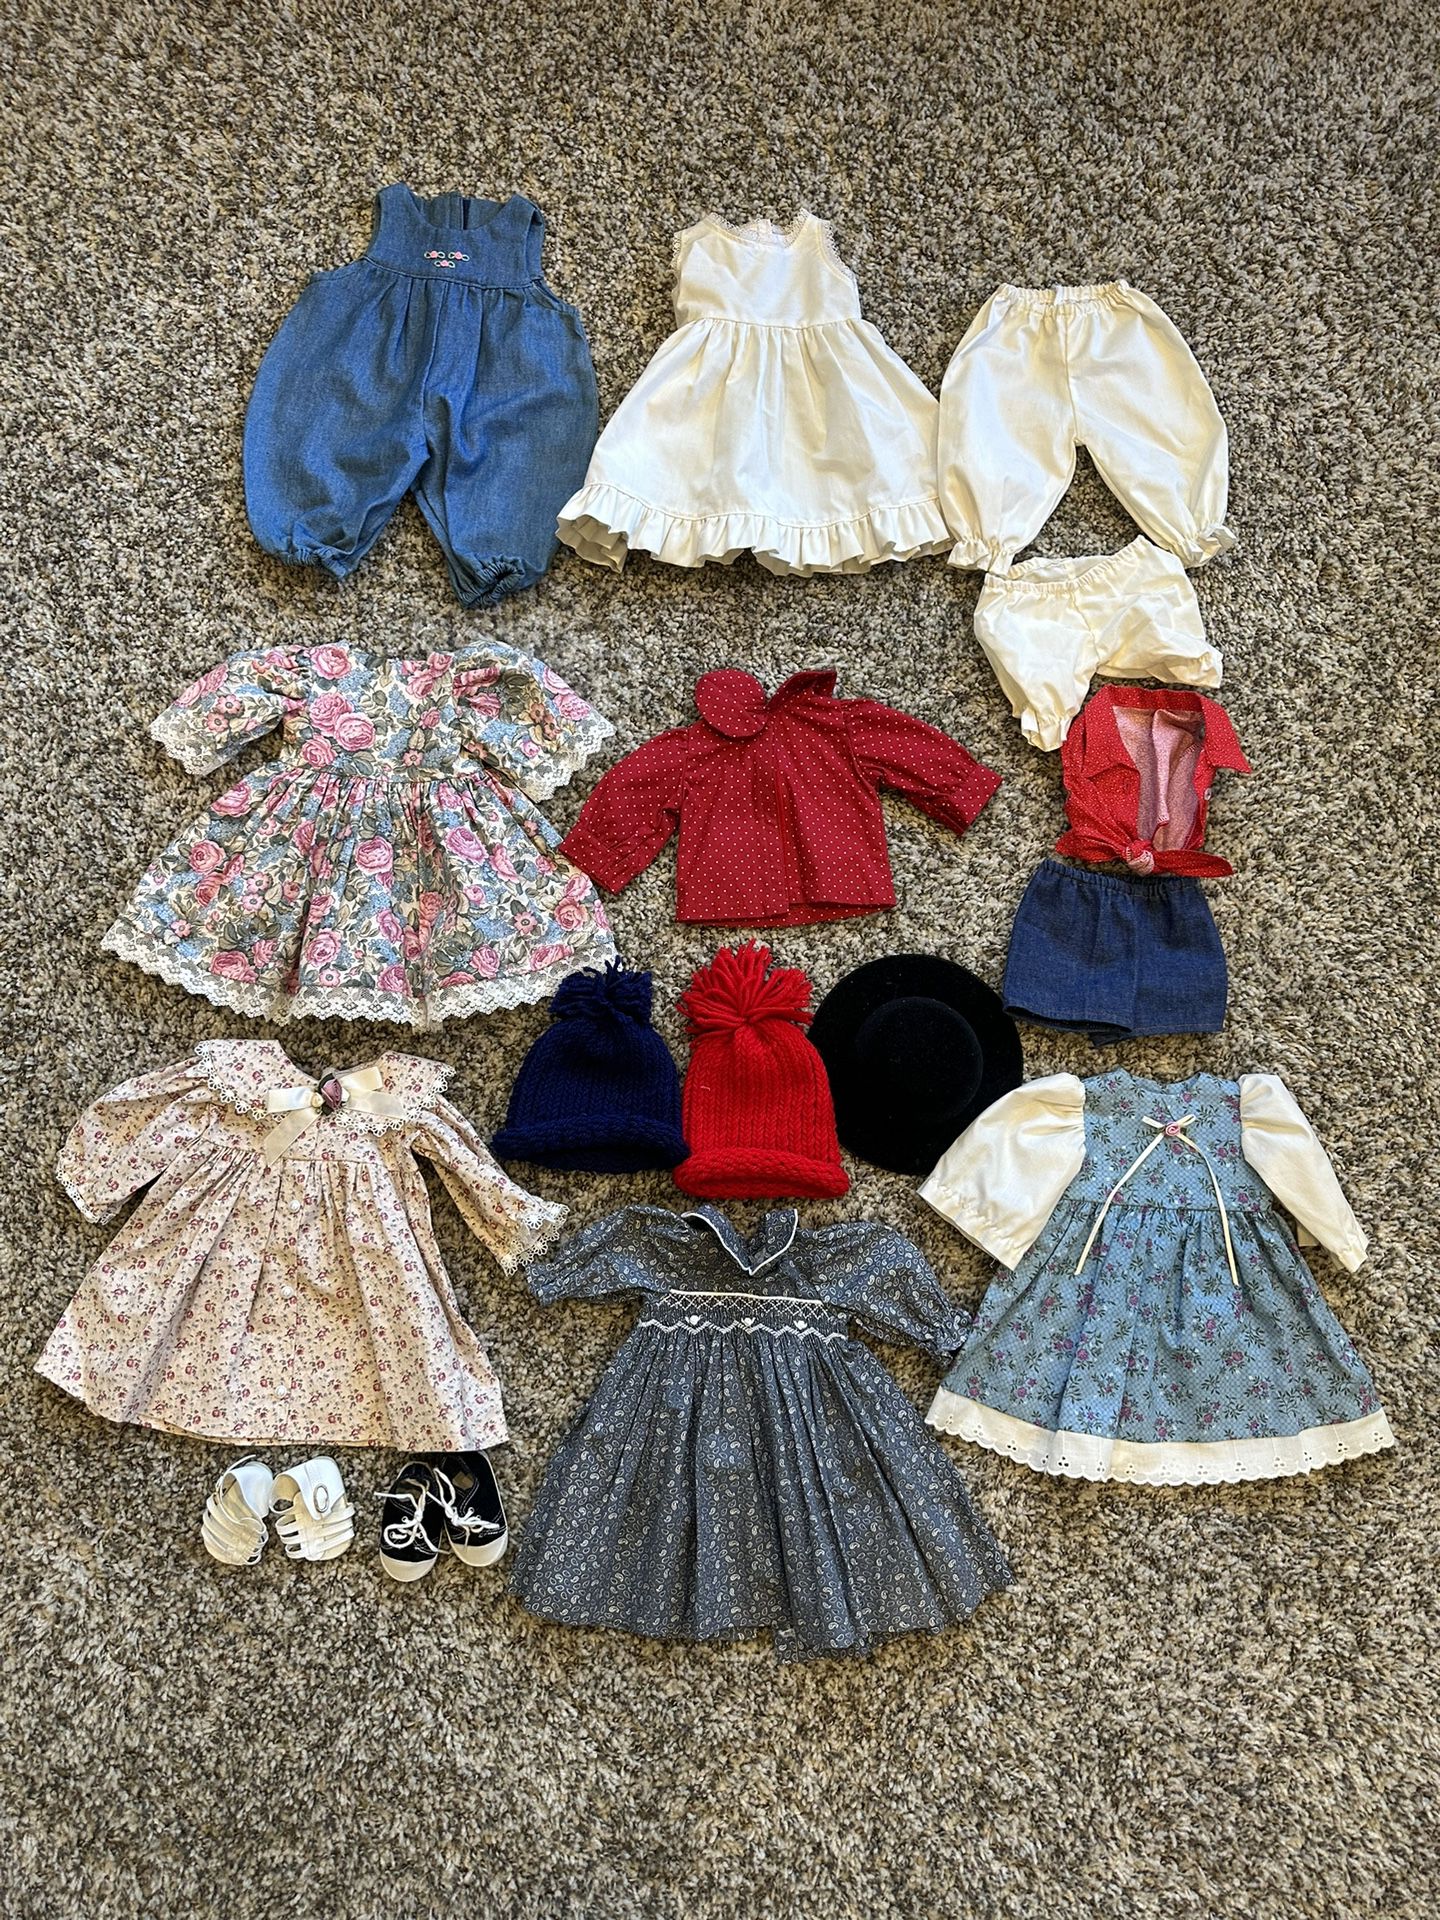 Homemade Doll Clothing